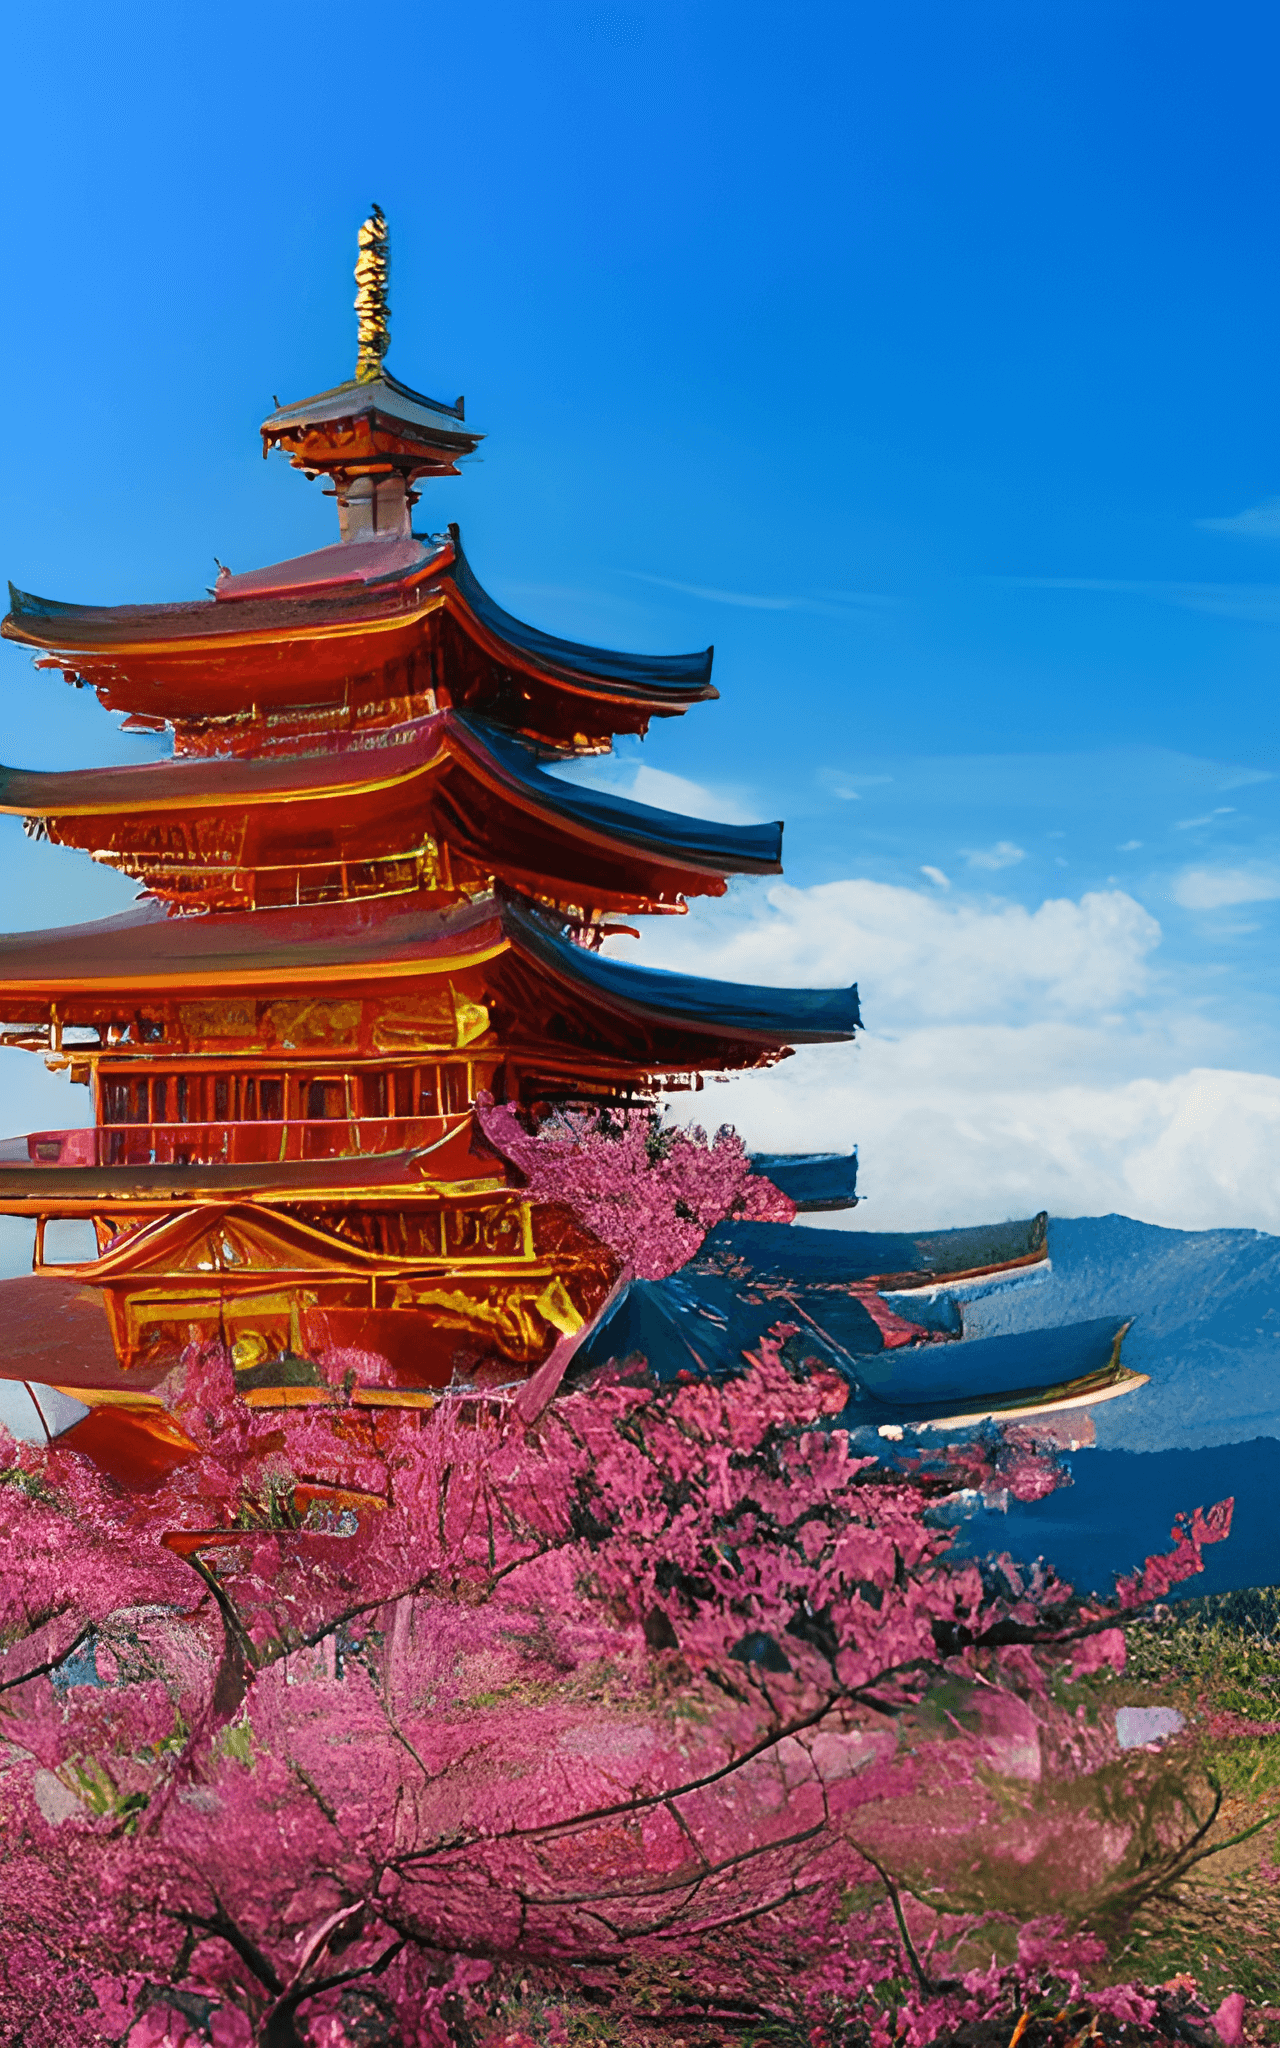 A five-story pagoda with pink flowers in the foreground - Japan